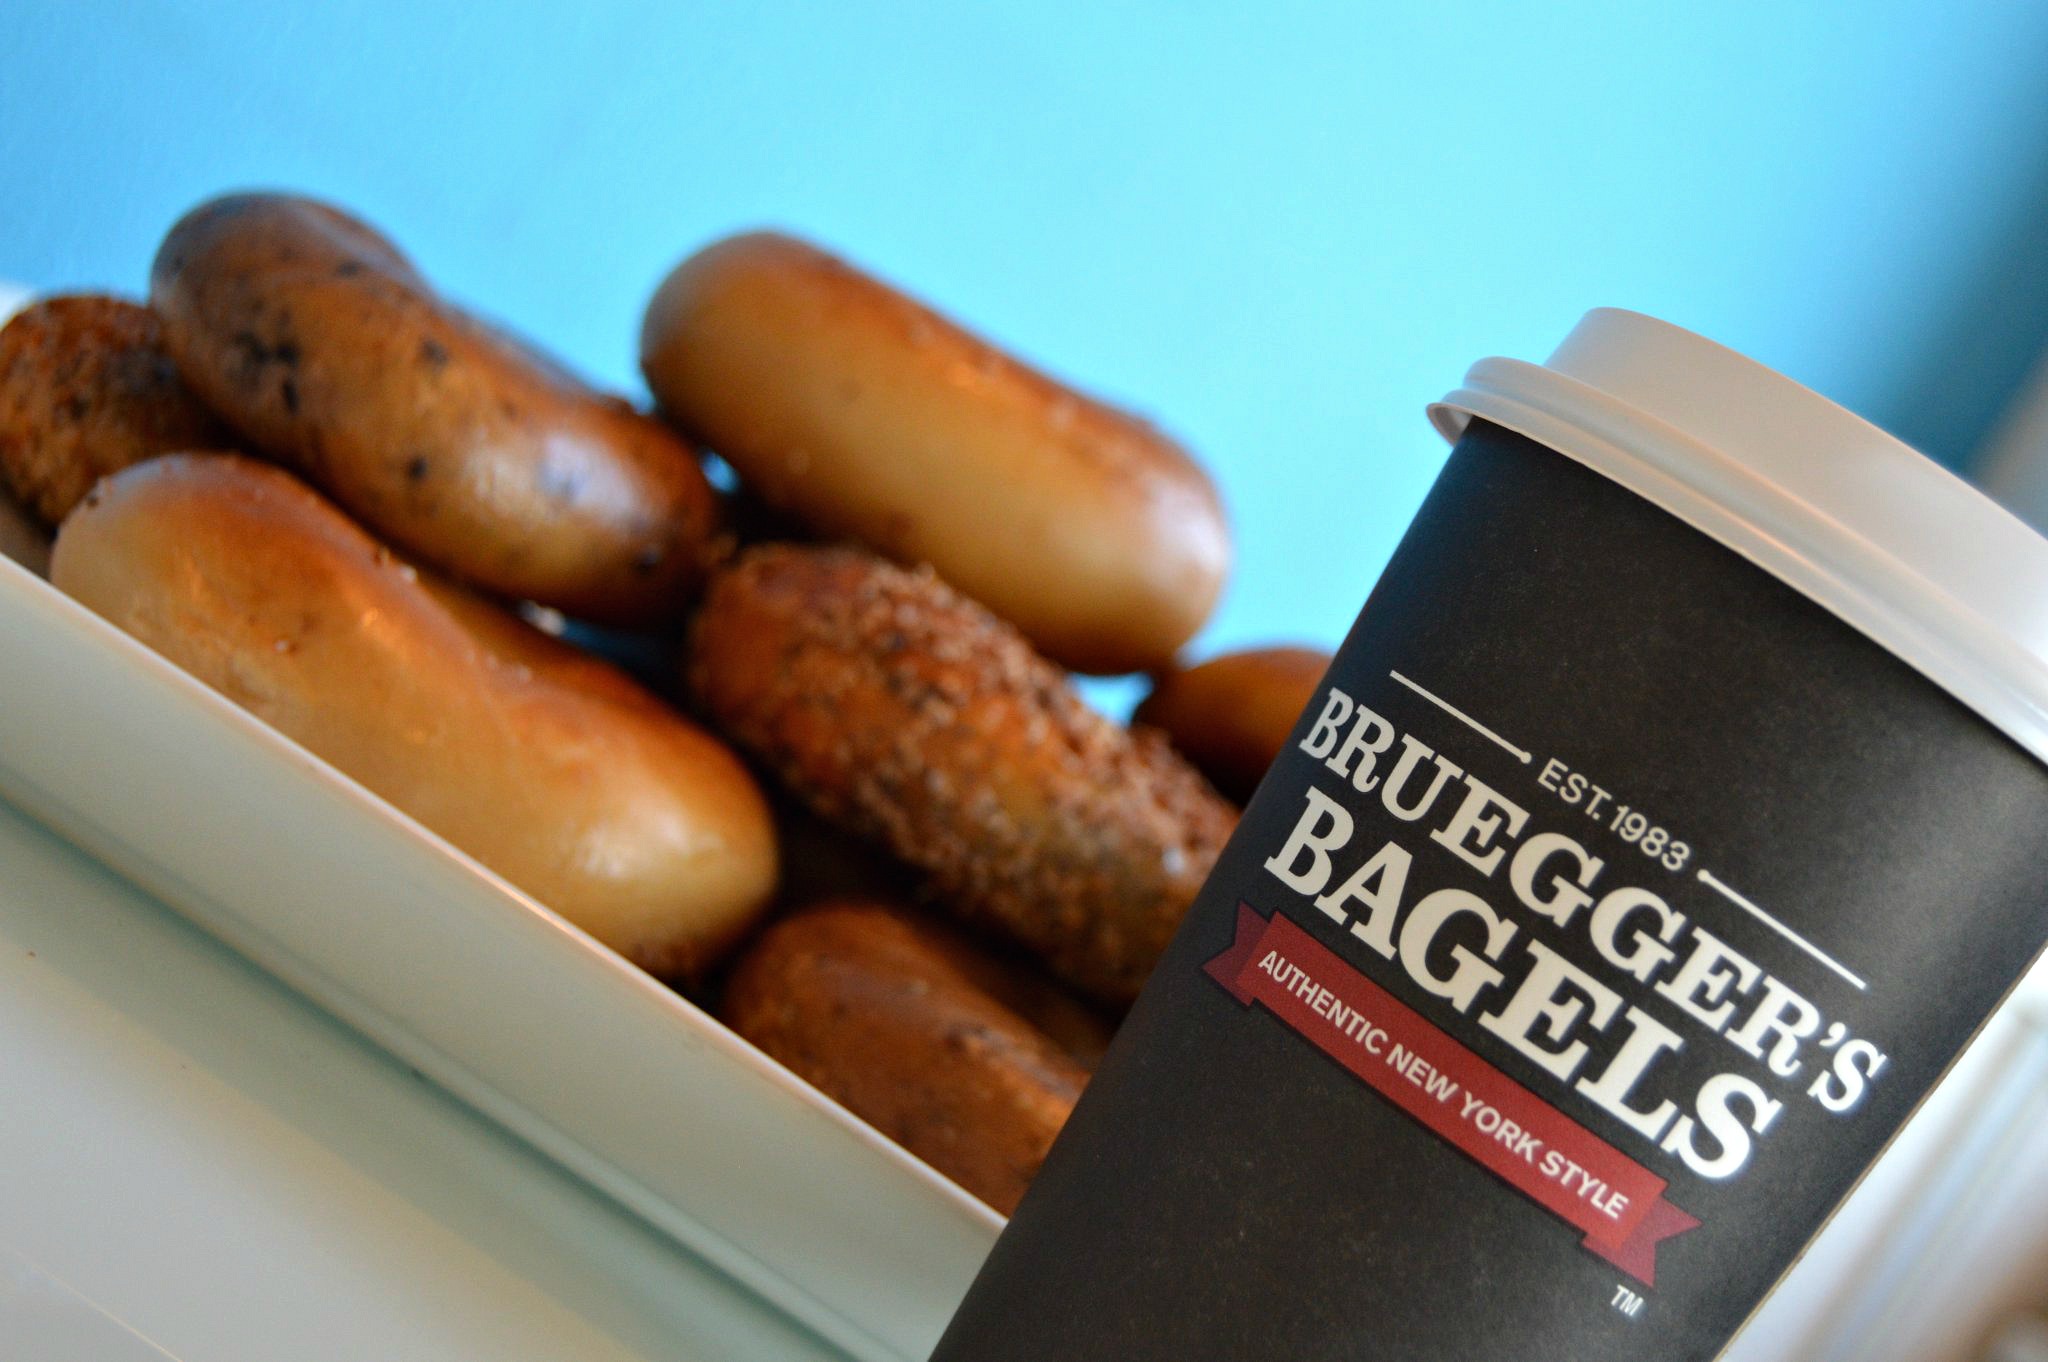 Bruegger's Bagels and coffee